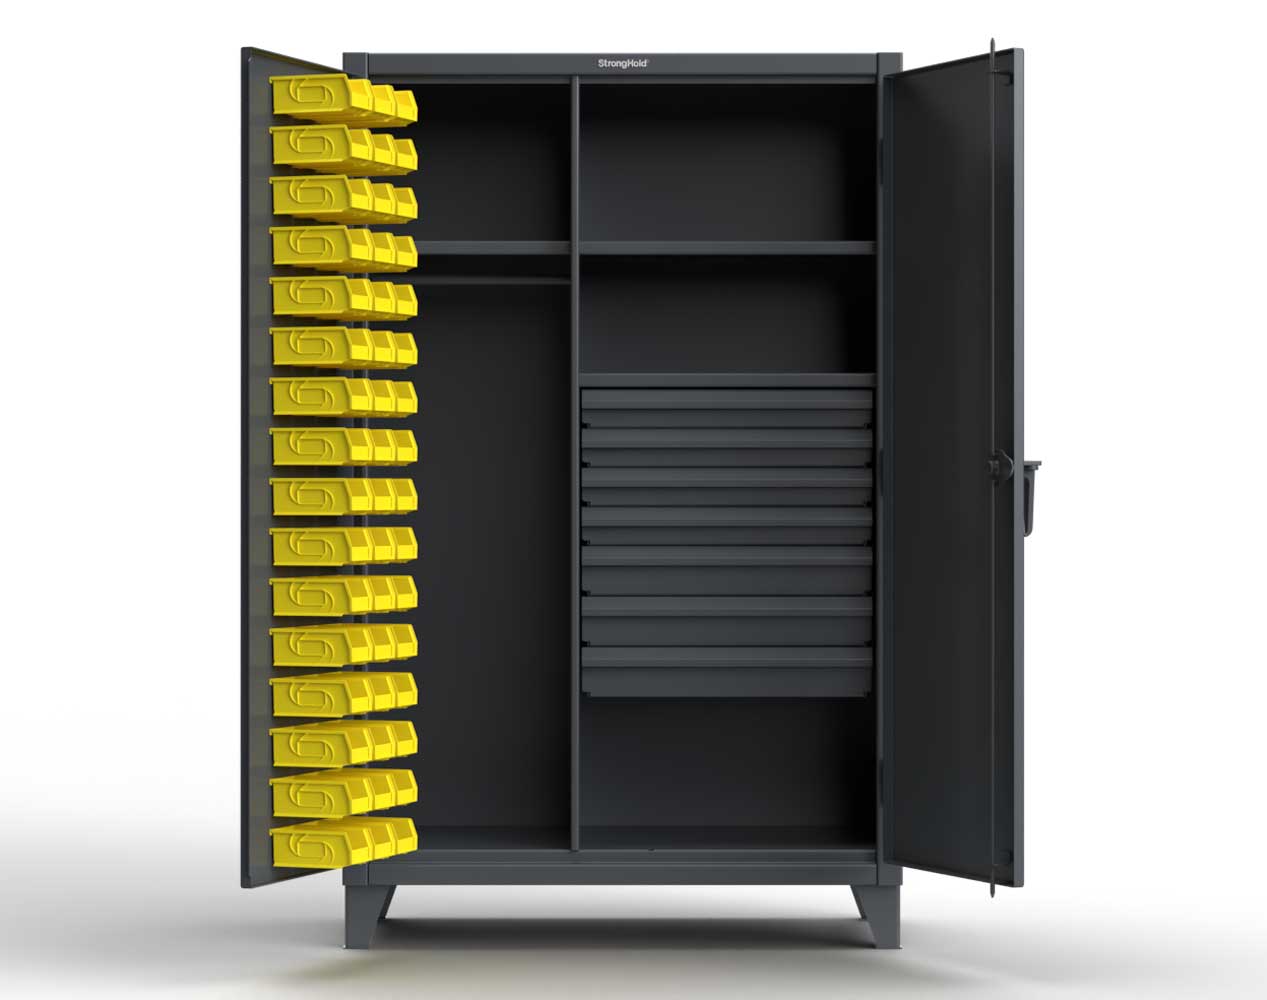 Extreme Duty 12 GA Uniform Cabinet with 48 Bins, 7 Drawers, 3 Shelves - 48 In. W x 24 In. D x 78 In. H